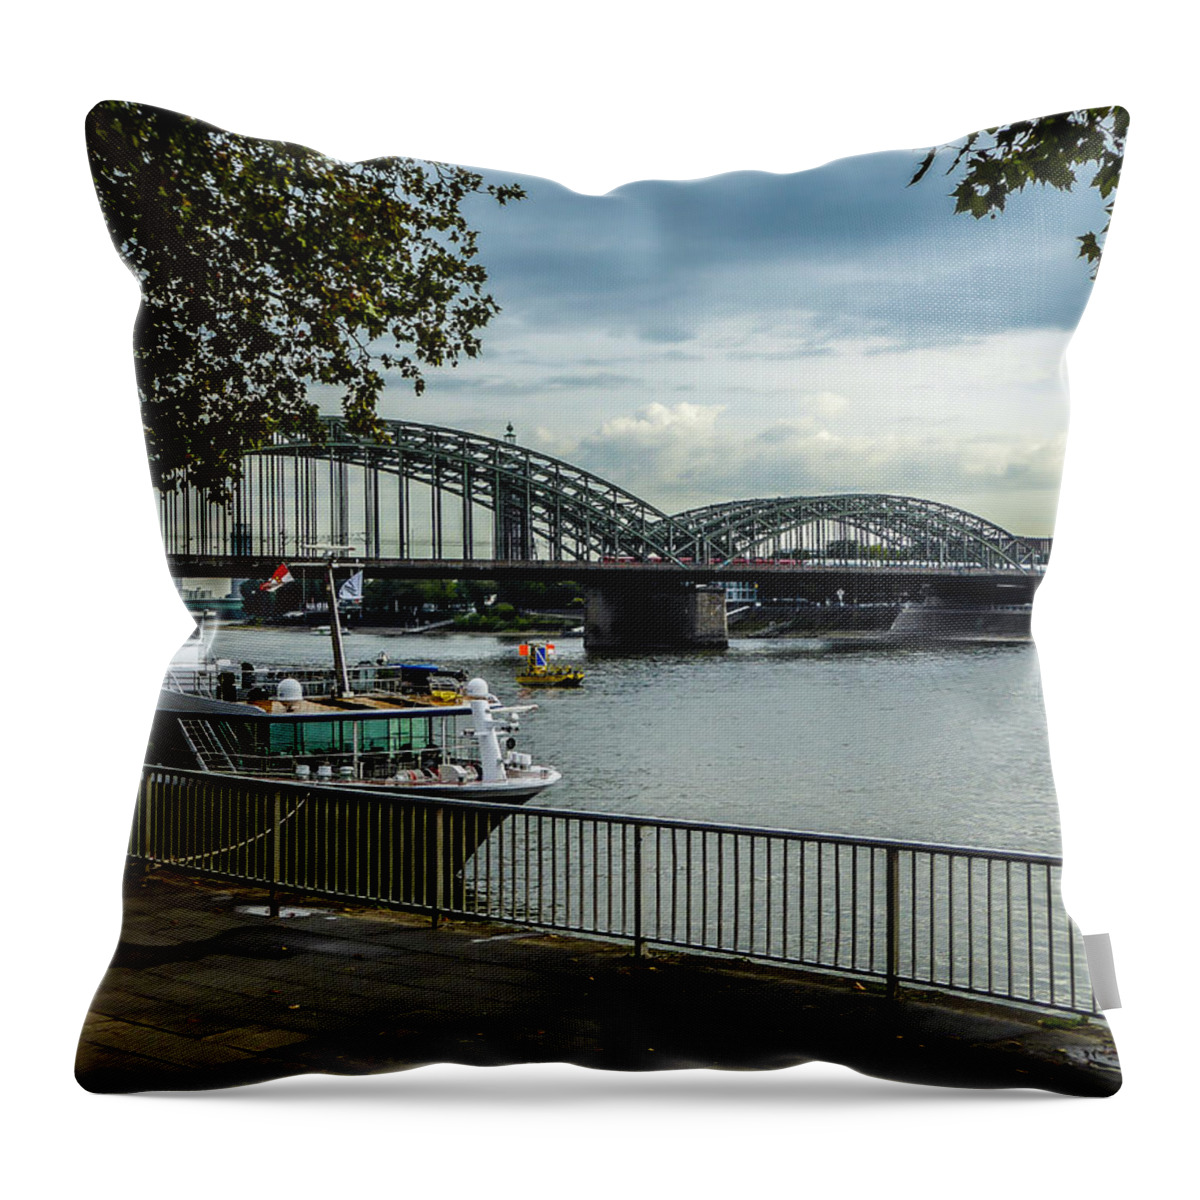 Hohenzollern Bridge Throw Pillow featuring the photograph Hohenzollern Bridge - Cologne by Pamela Newcomb